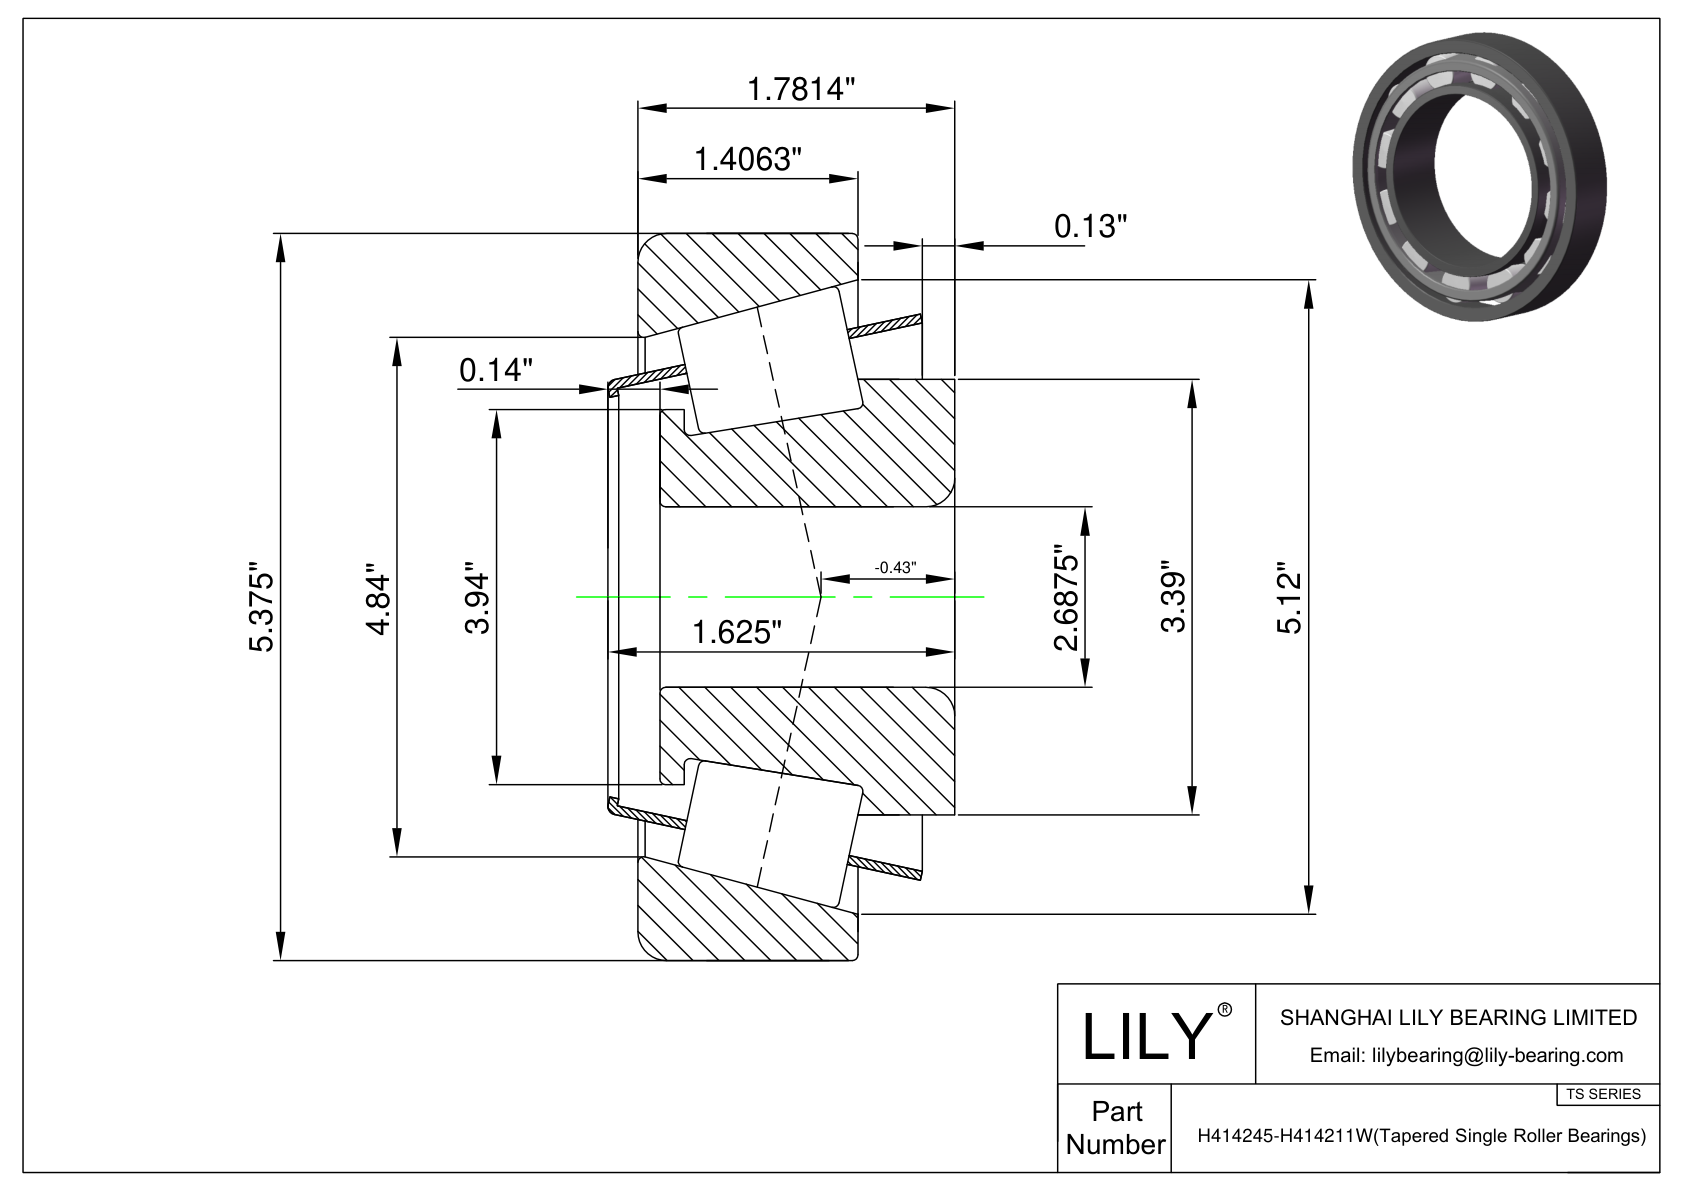 H414245-H414211W TS (Tapered Single Roller Bearings) (Imperial) cad drawing